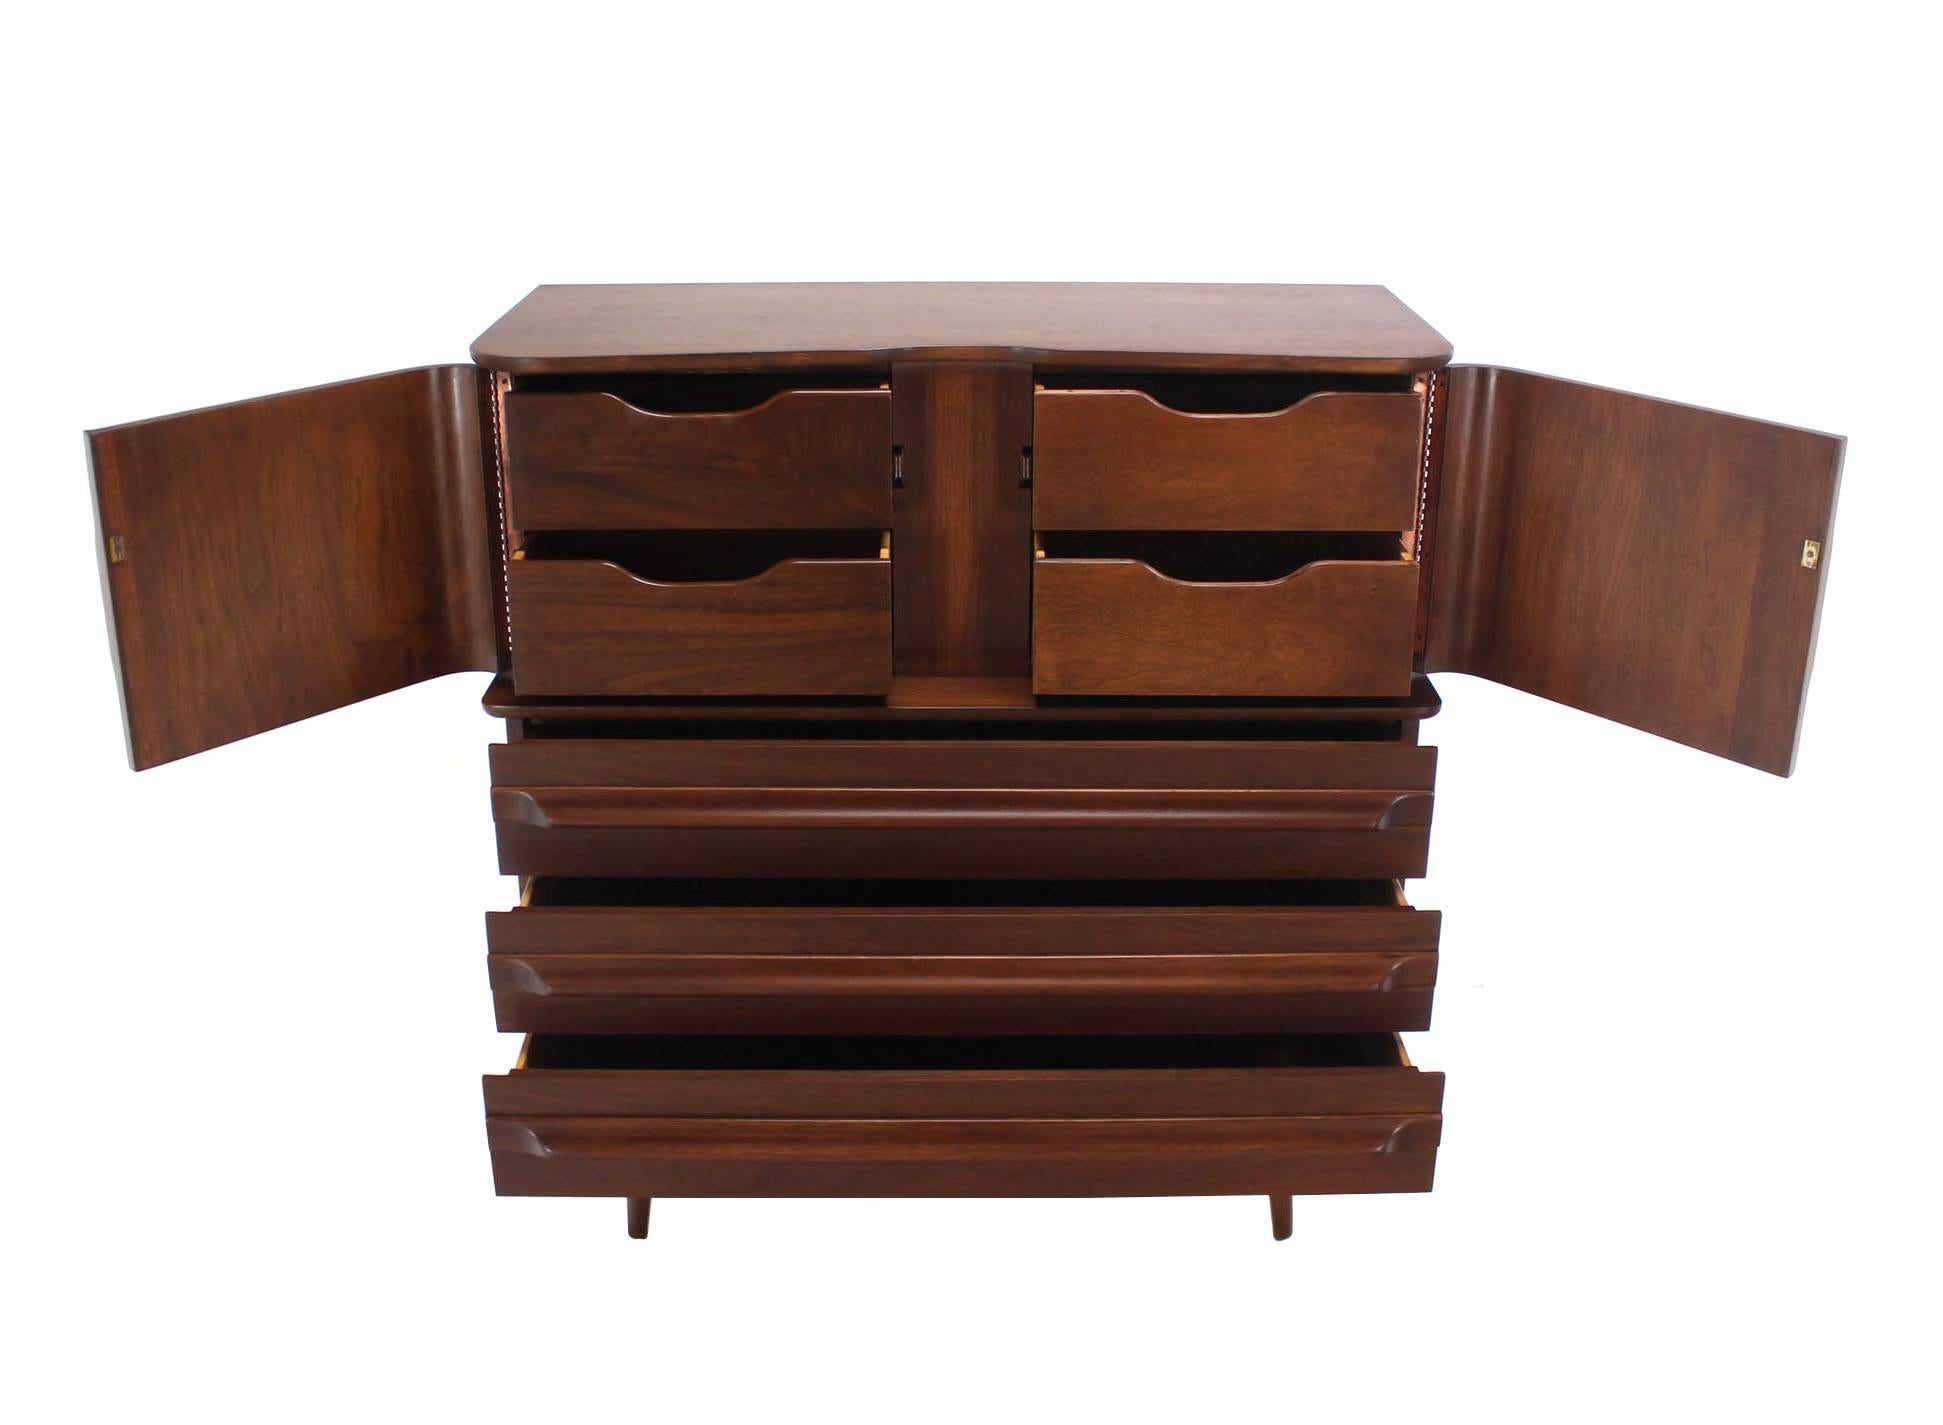 Lacquered Walnut High Chest or Dresser w/ Drawers and Two Doors Compartment